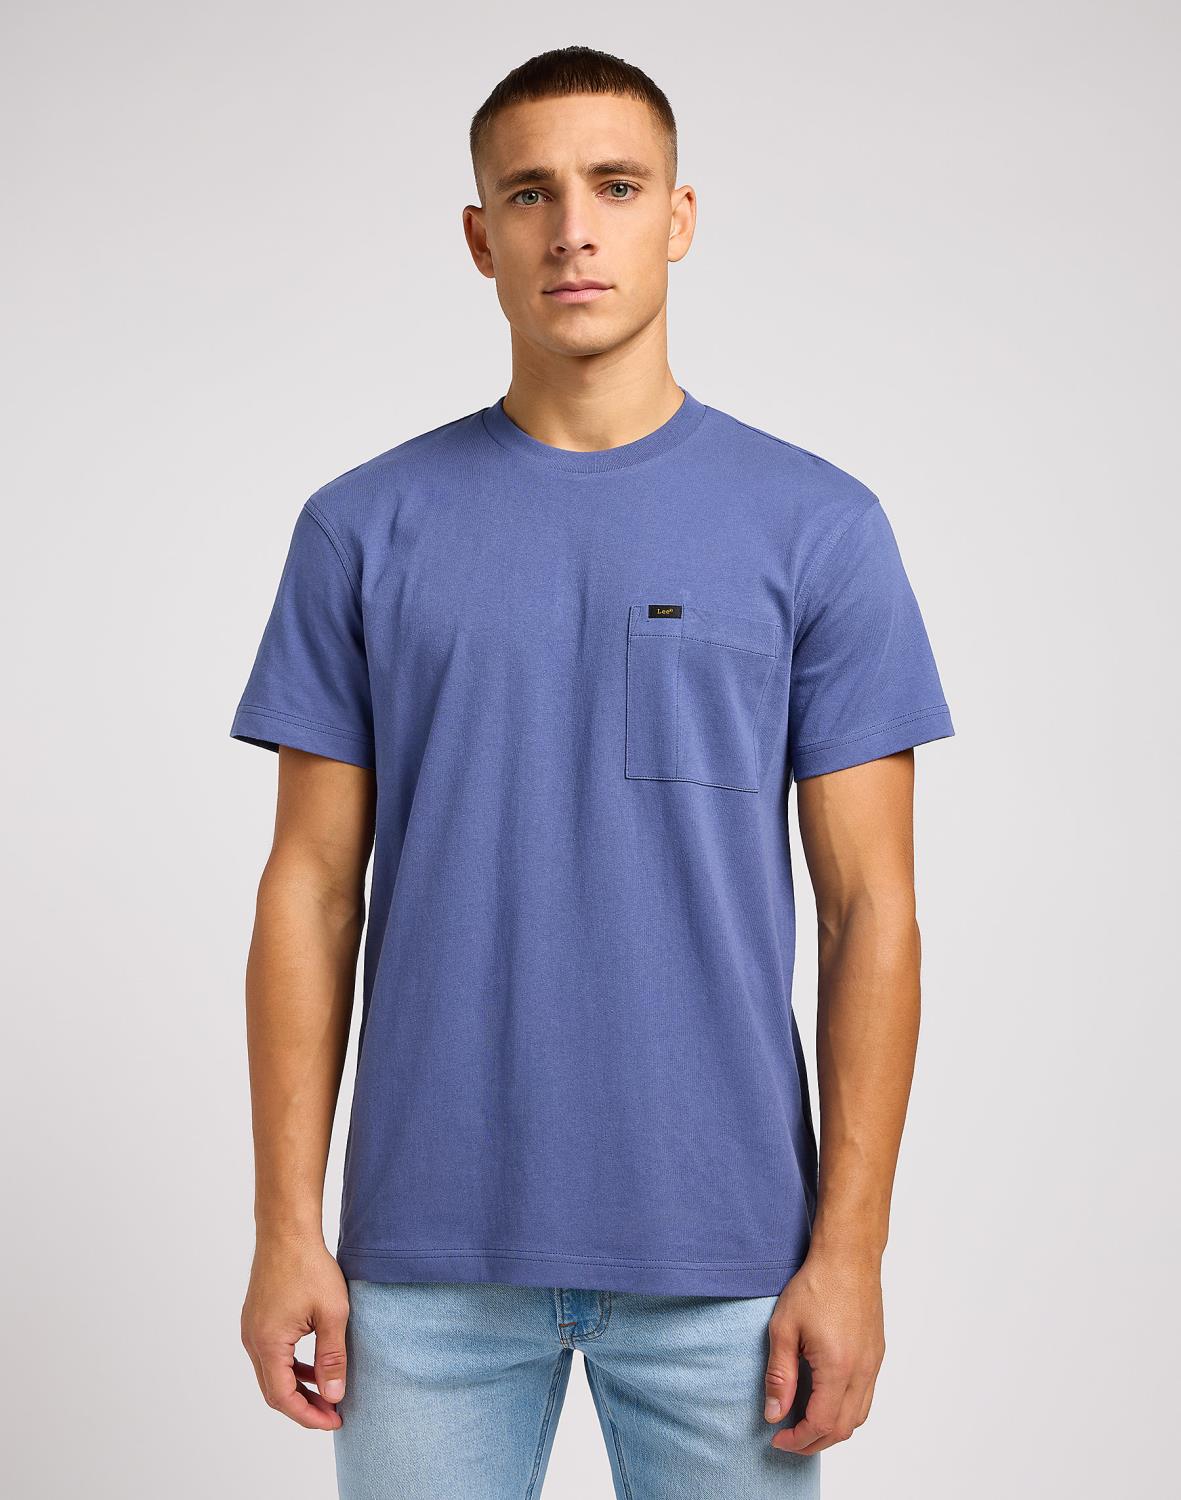 Lee Relaxed Pocket Tee - Surf Blue